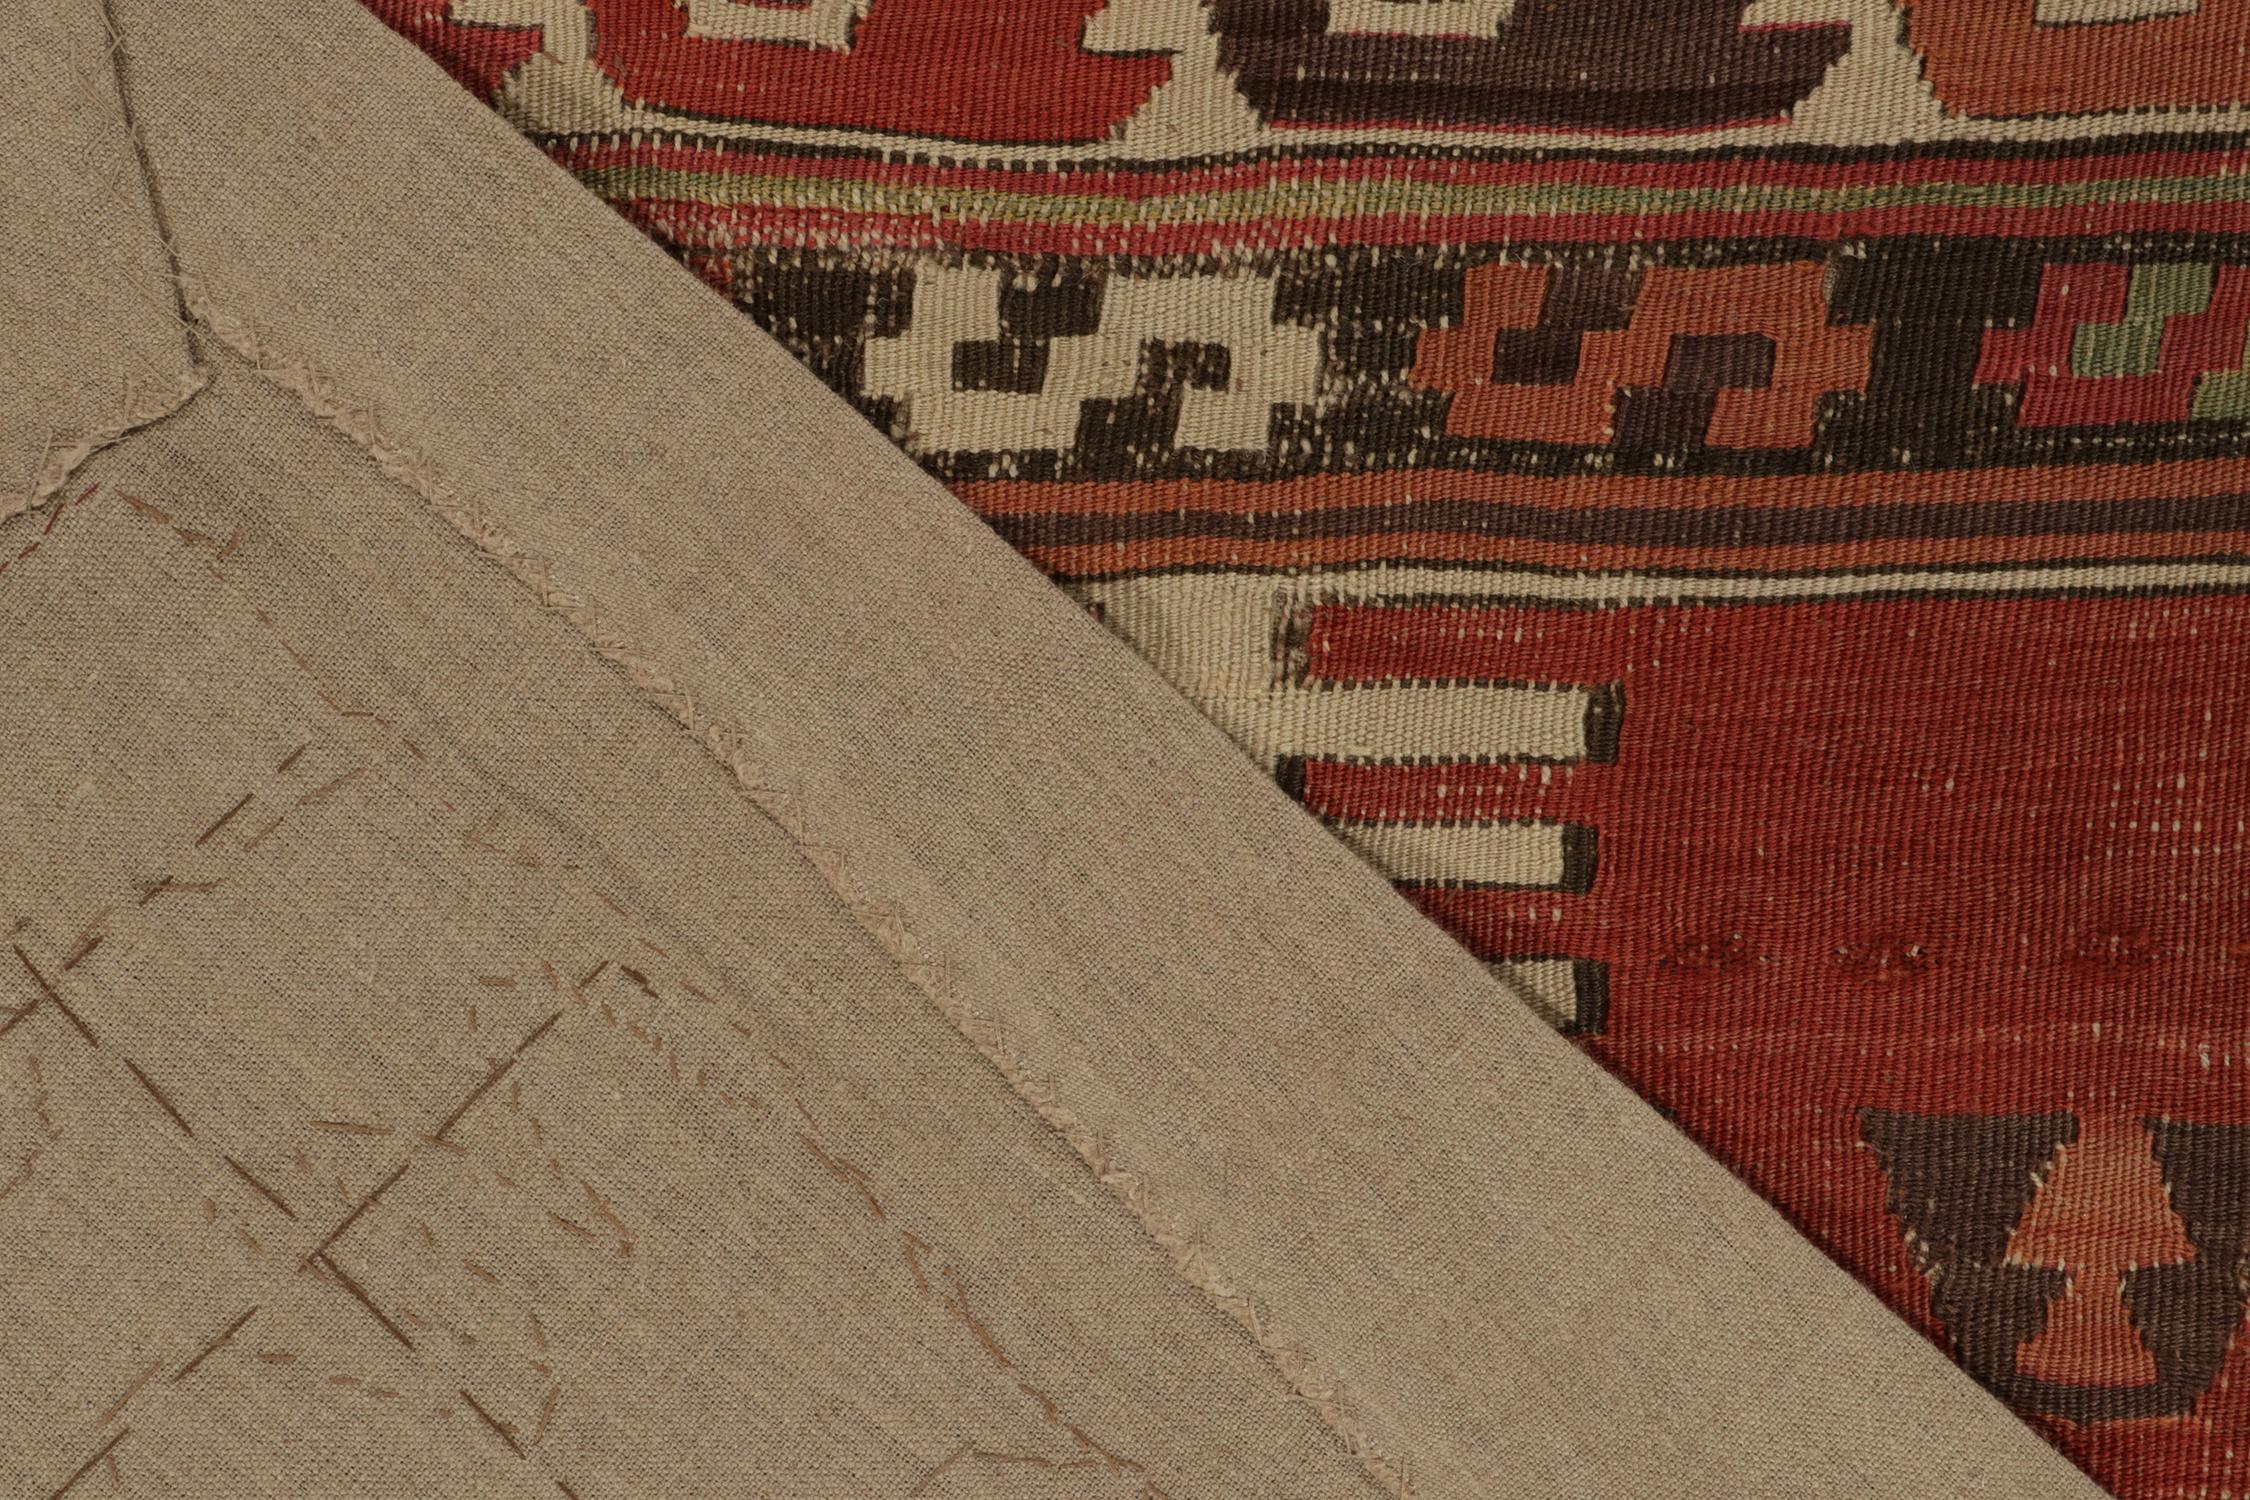 Antique Tribal Kilim rug in Red, Beige-Brown Geometric Pattern by Rug & Kilim In Good Condition For Sale In Long Island City, NY